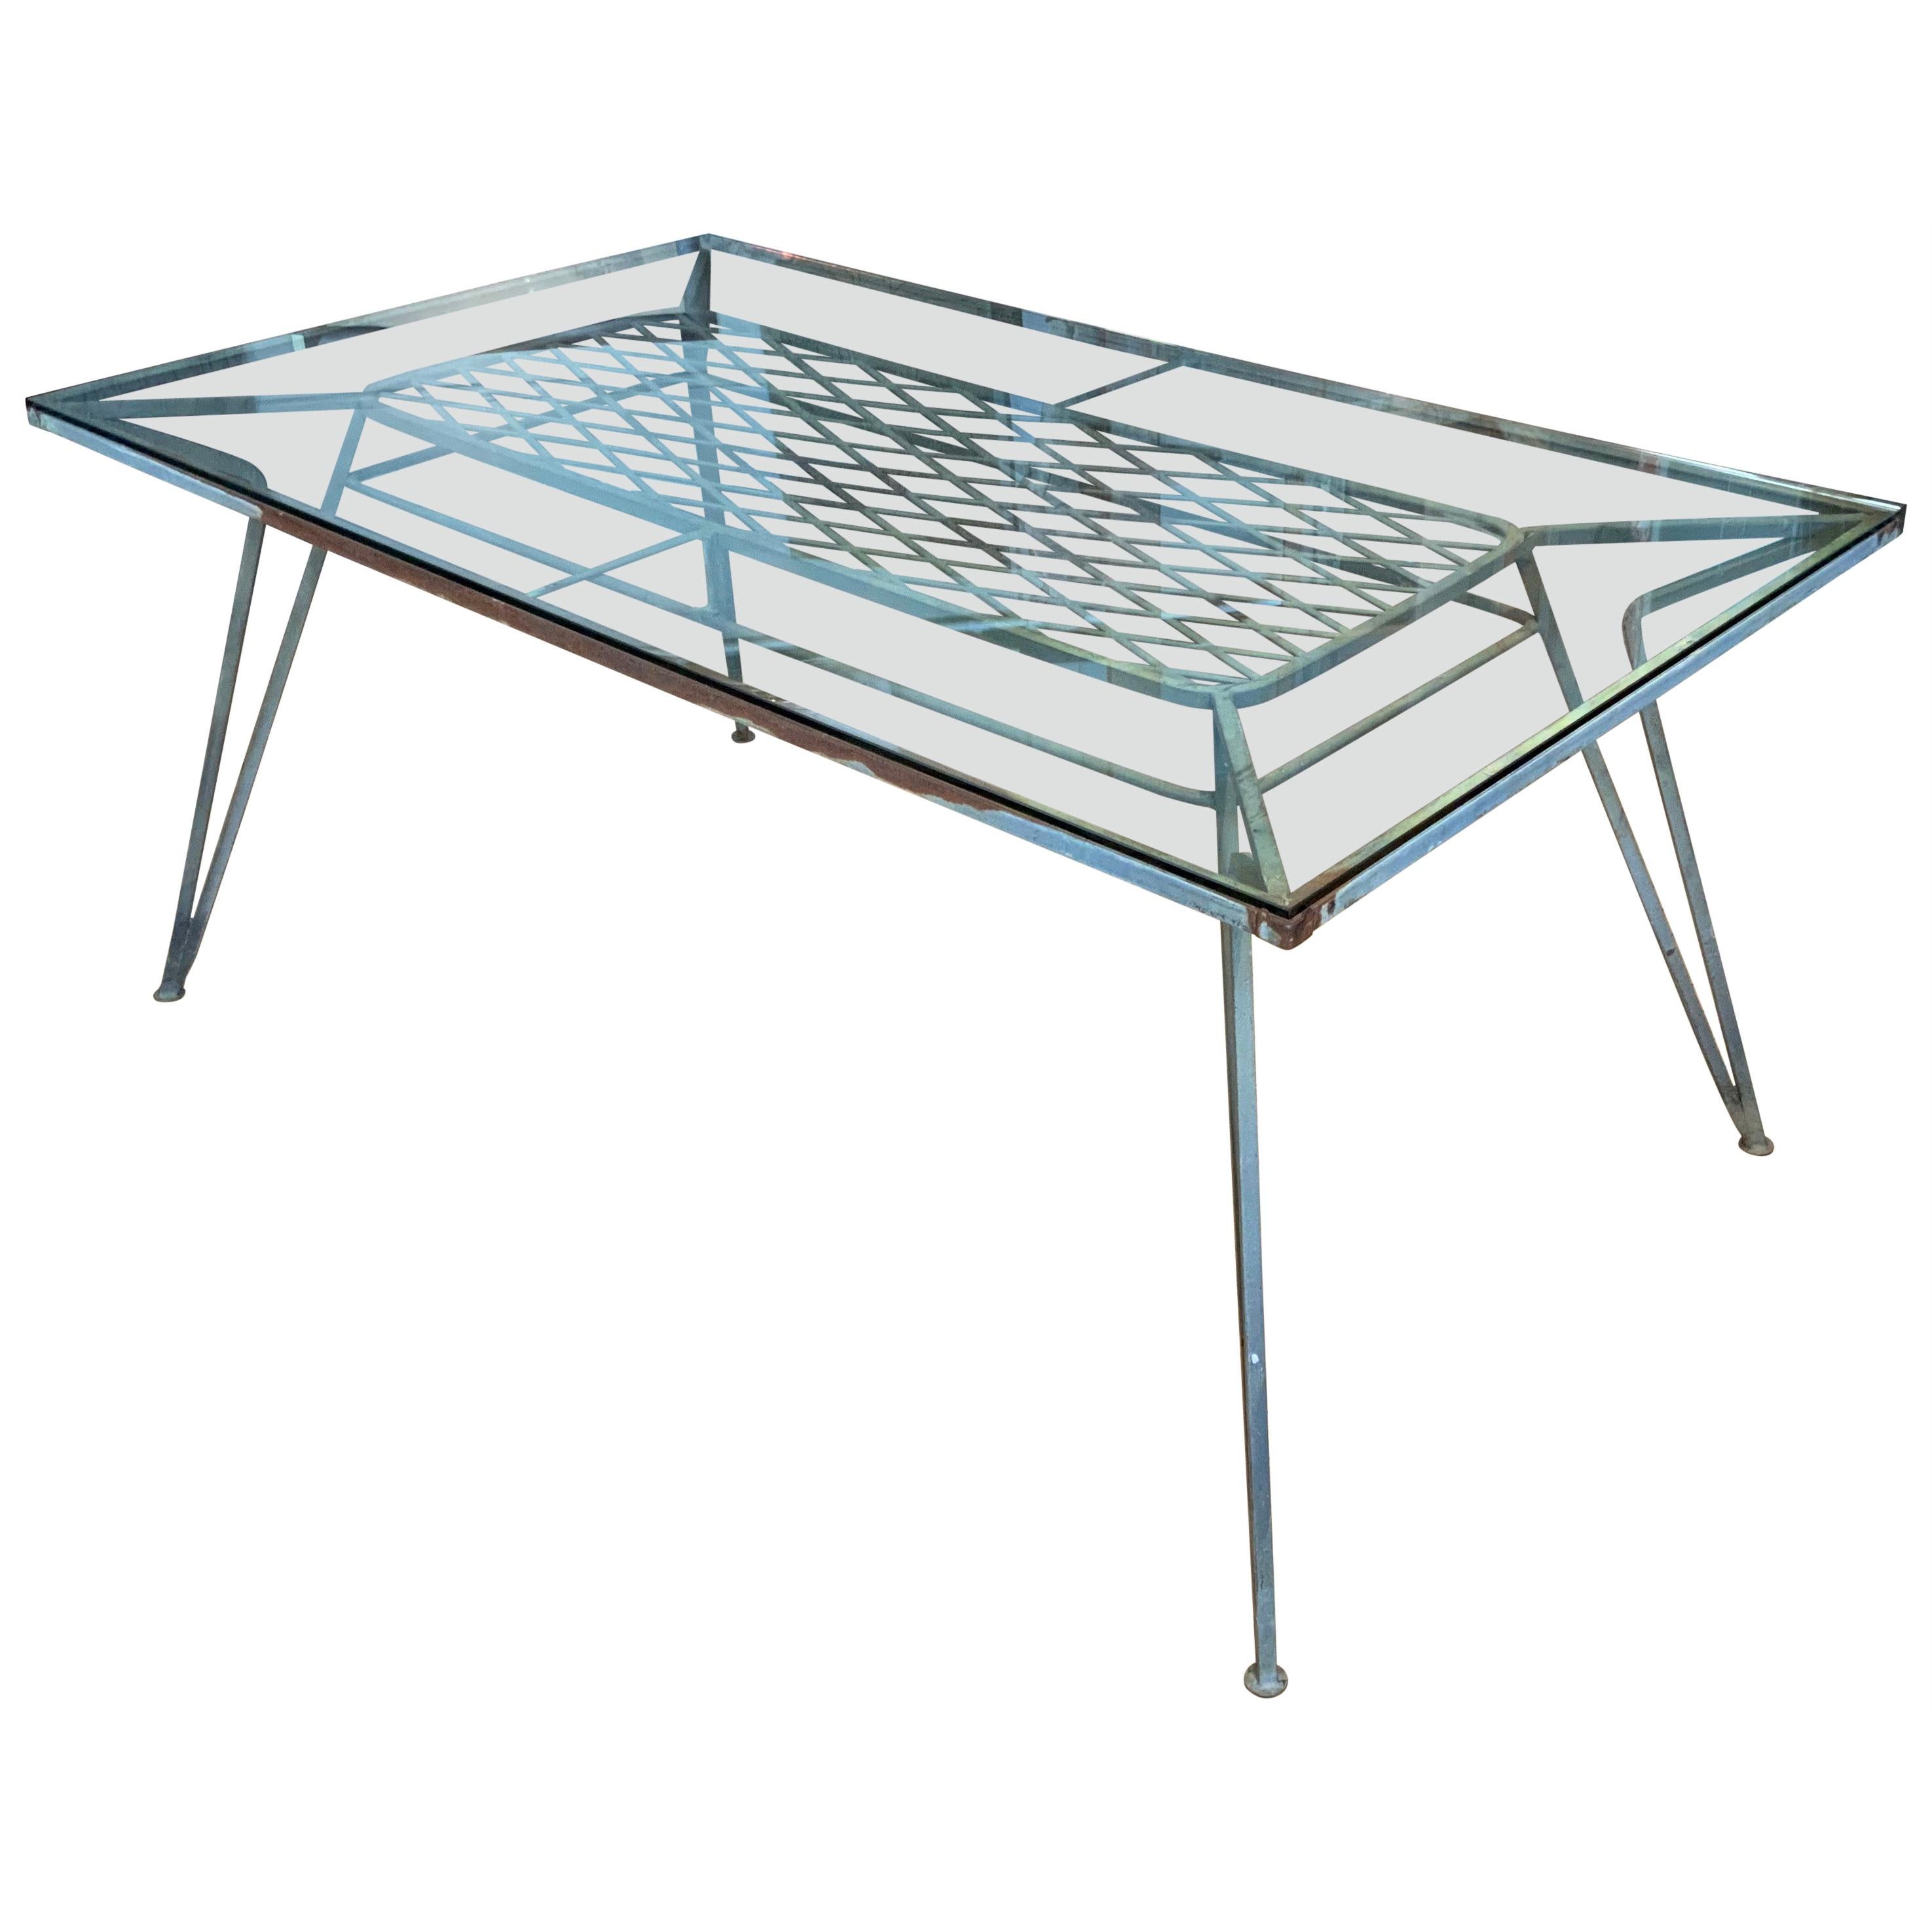 Large Antique Wrought Iron and Glass Dining Table by Salterini